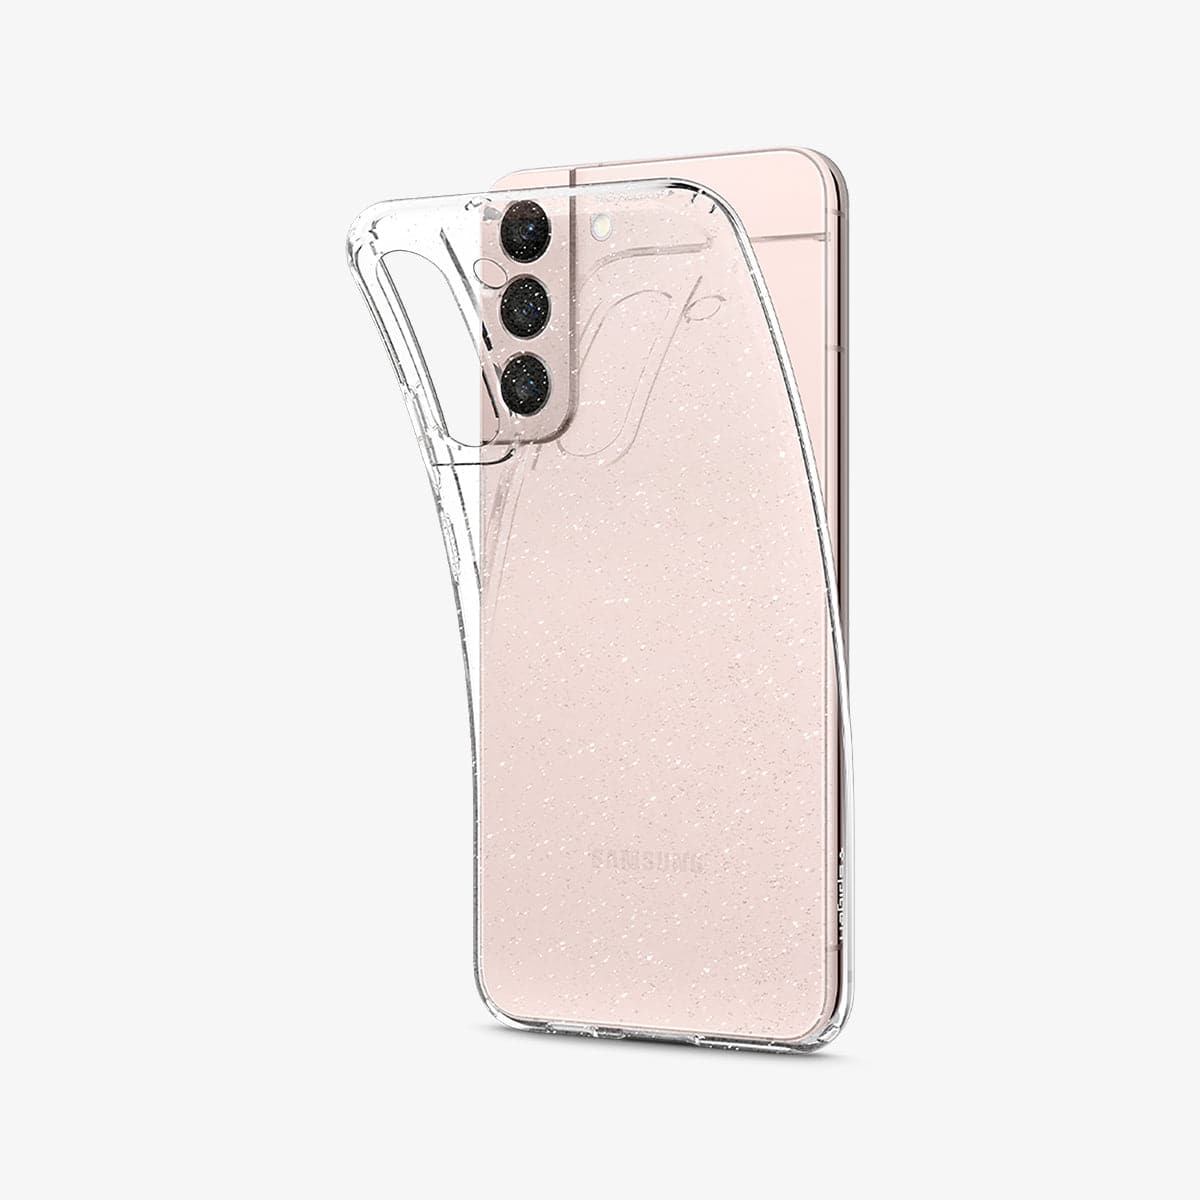 ACS03985 - Galaxy S22 5G Case Liquid Crystal Glitter in crystal quartz showing the back with case bending away from device to show the flexibility